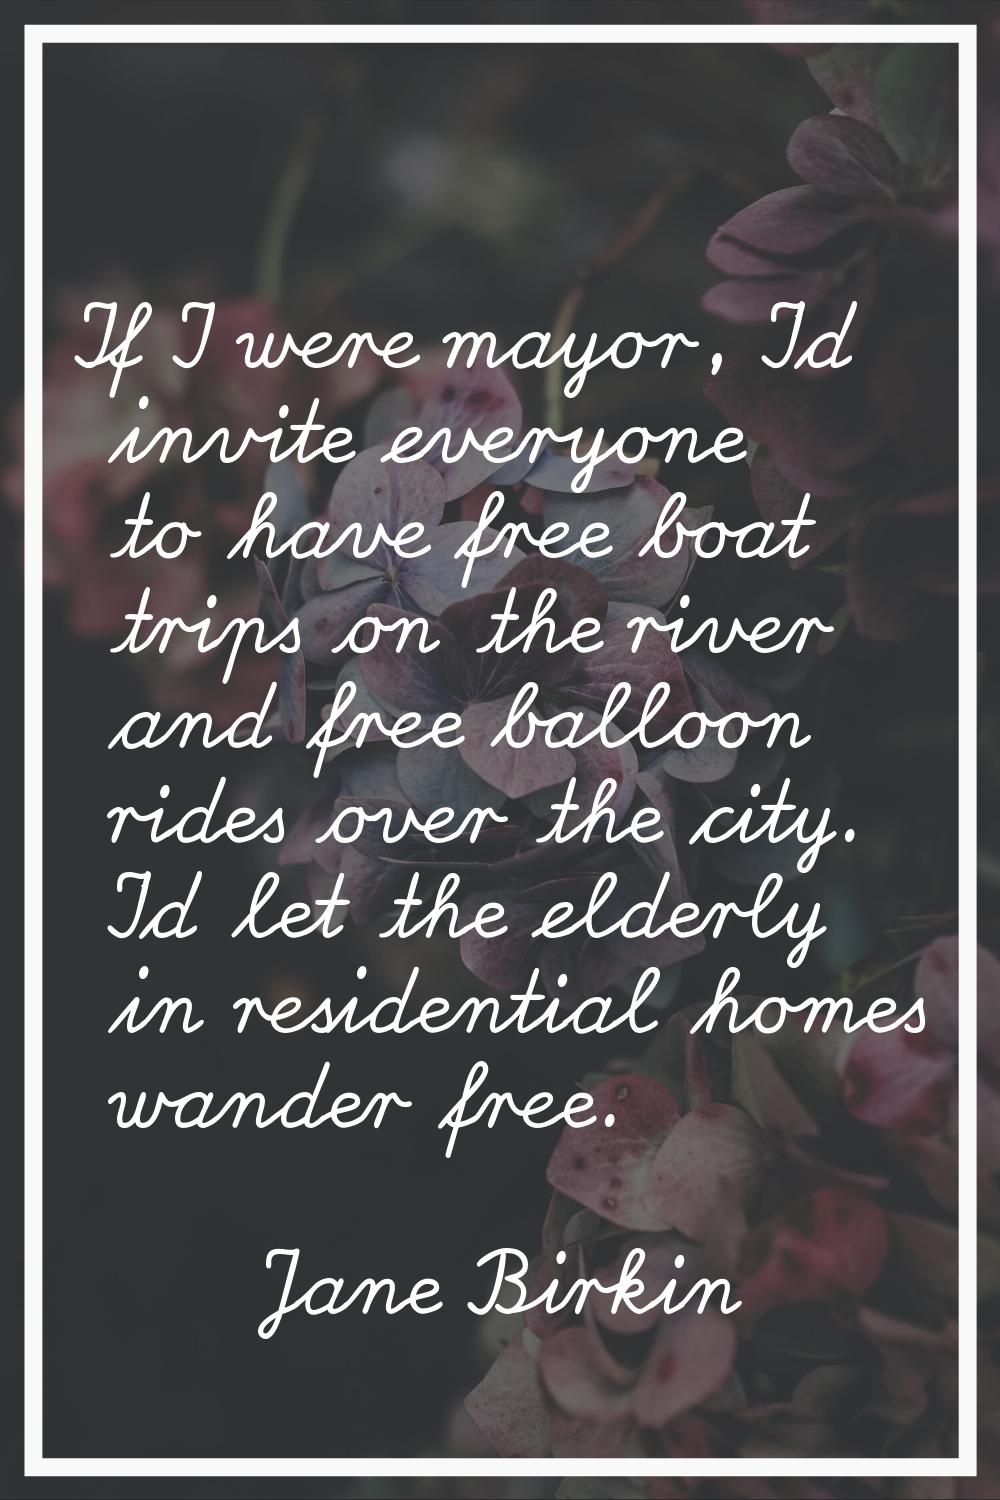 If I were mayor, I'd invite everyone to have free boat trips on the river and free balloon rides ov